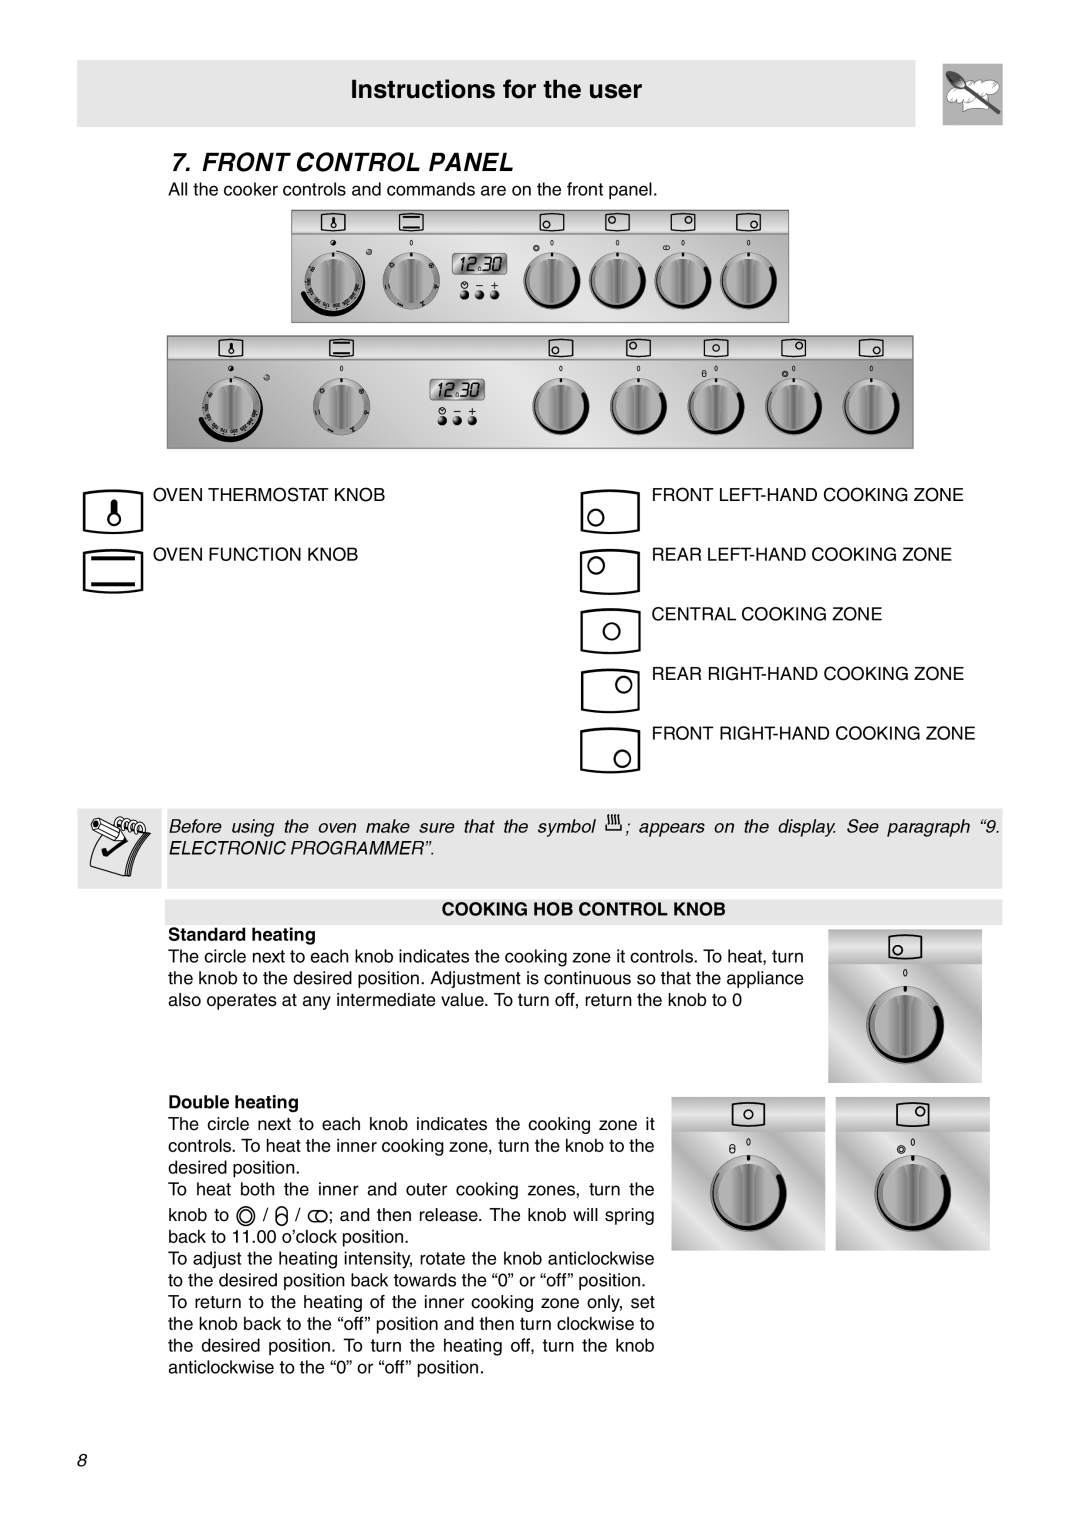 Smeg OF602XA, OF902XA manual Front Control Panel, Instructions for the user, Electronic Programmer”, Double heating 